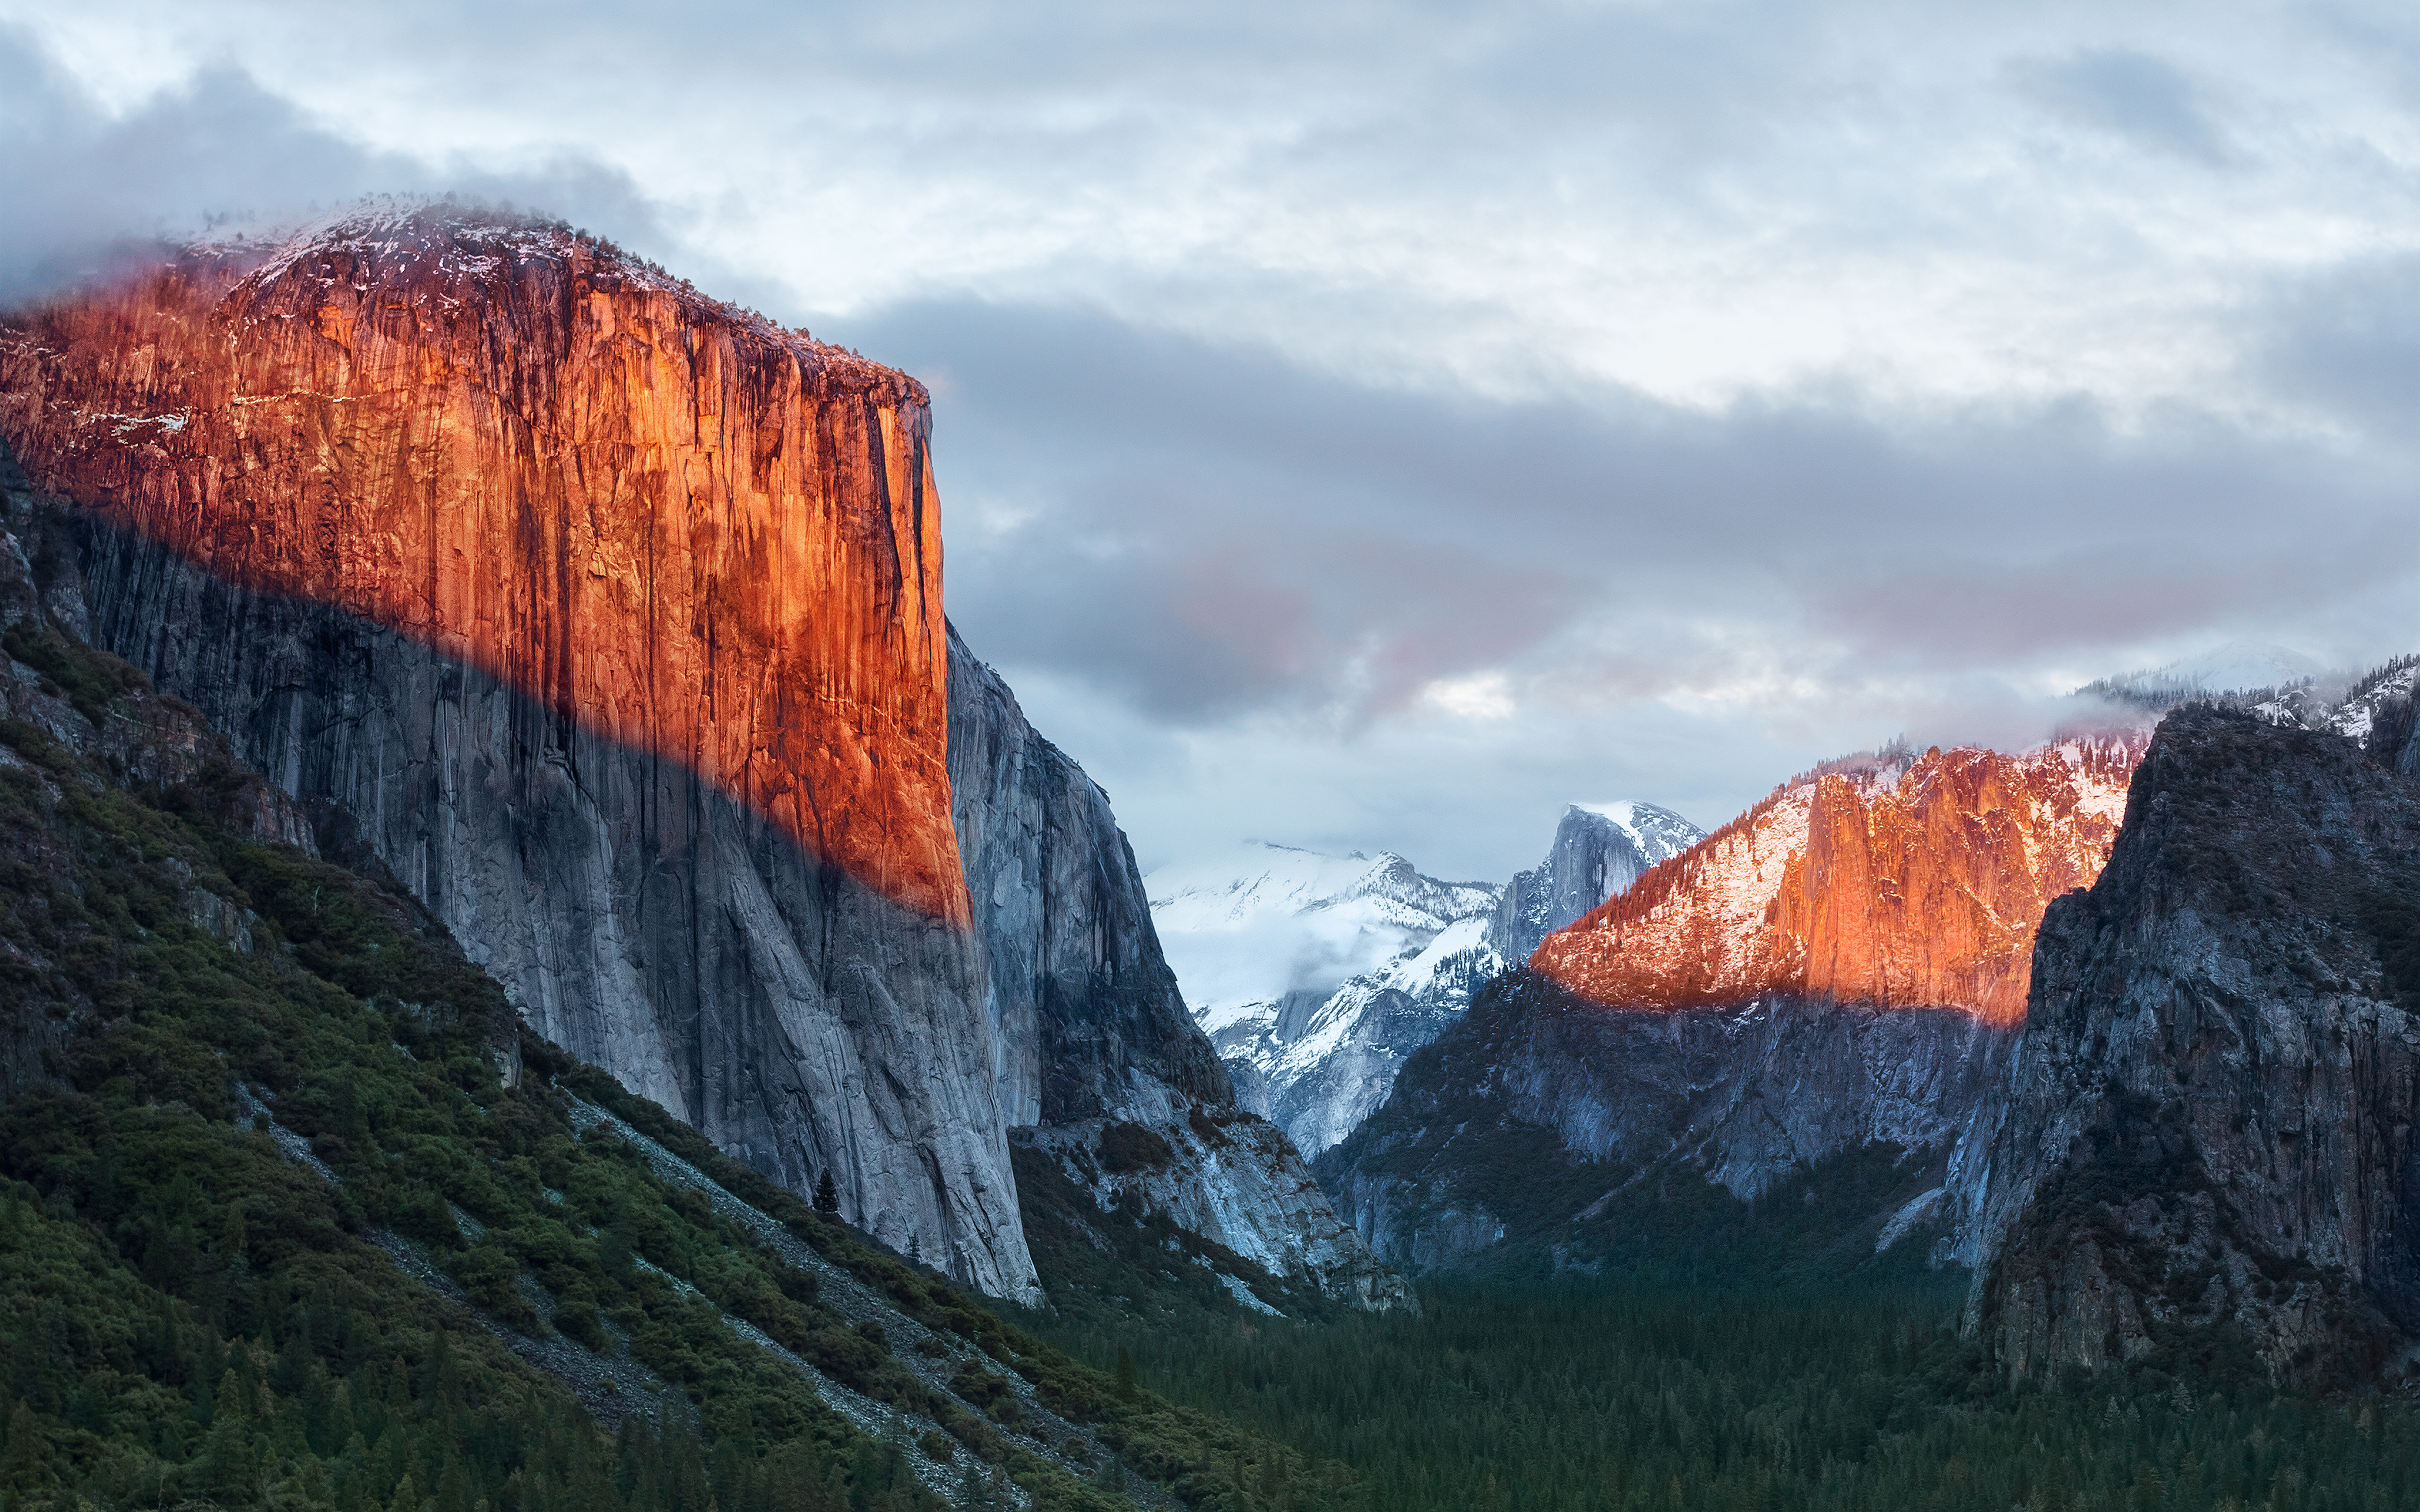 How To Get The Os X El Capitan Wallpaper Right Now